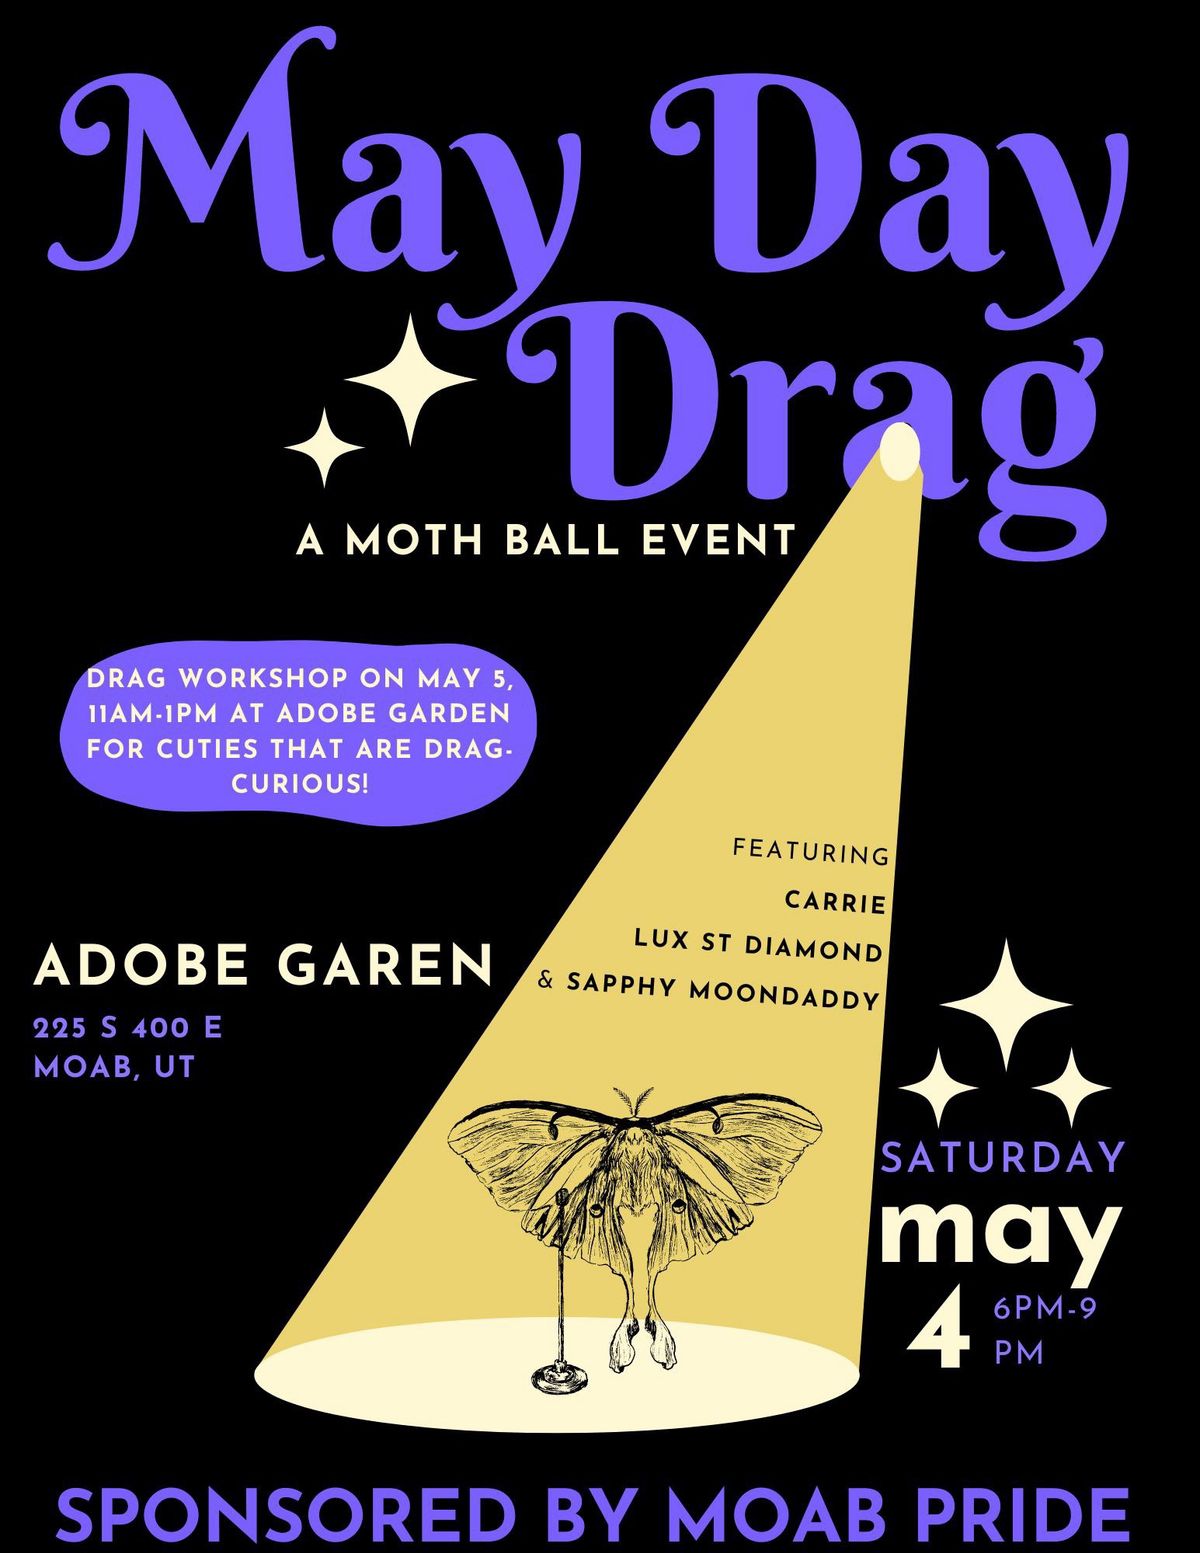 May Day Drag: a moth ball event